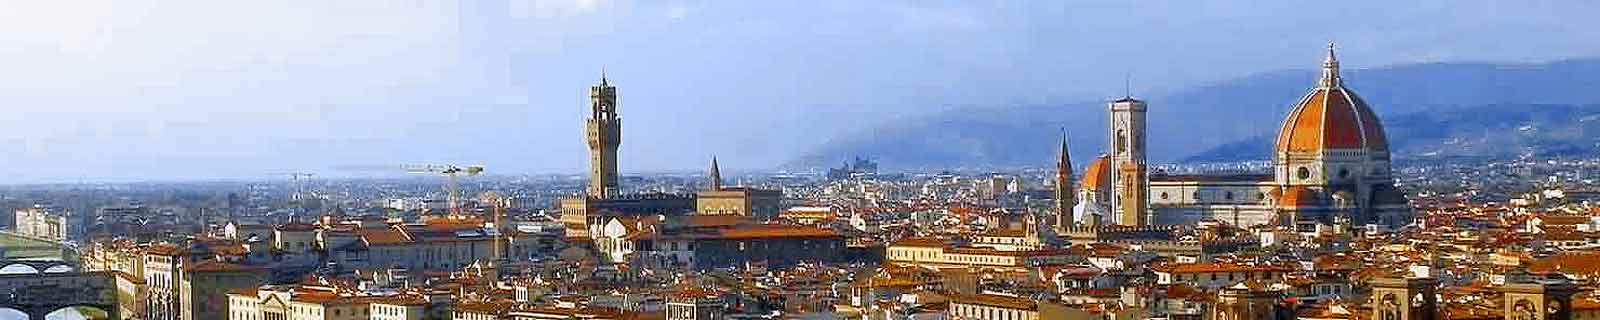 Panoramic photo of Florence, Italy, a major destination for cruises to the port of Livorno